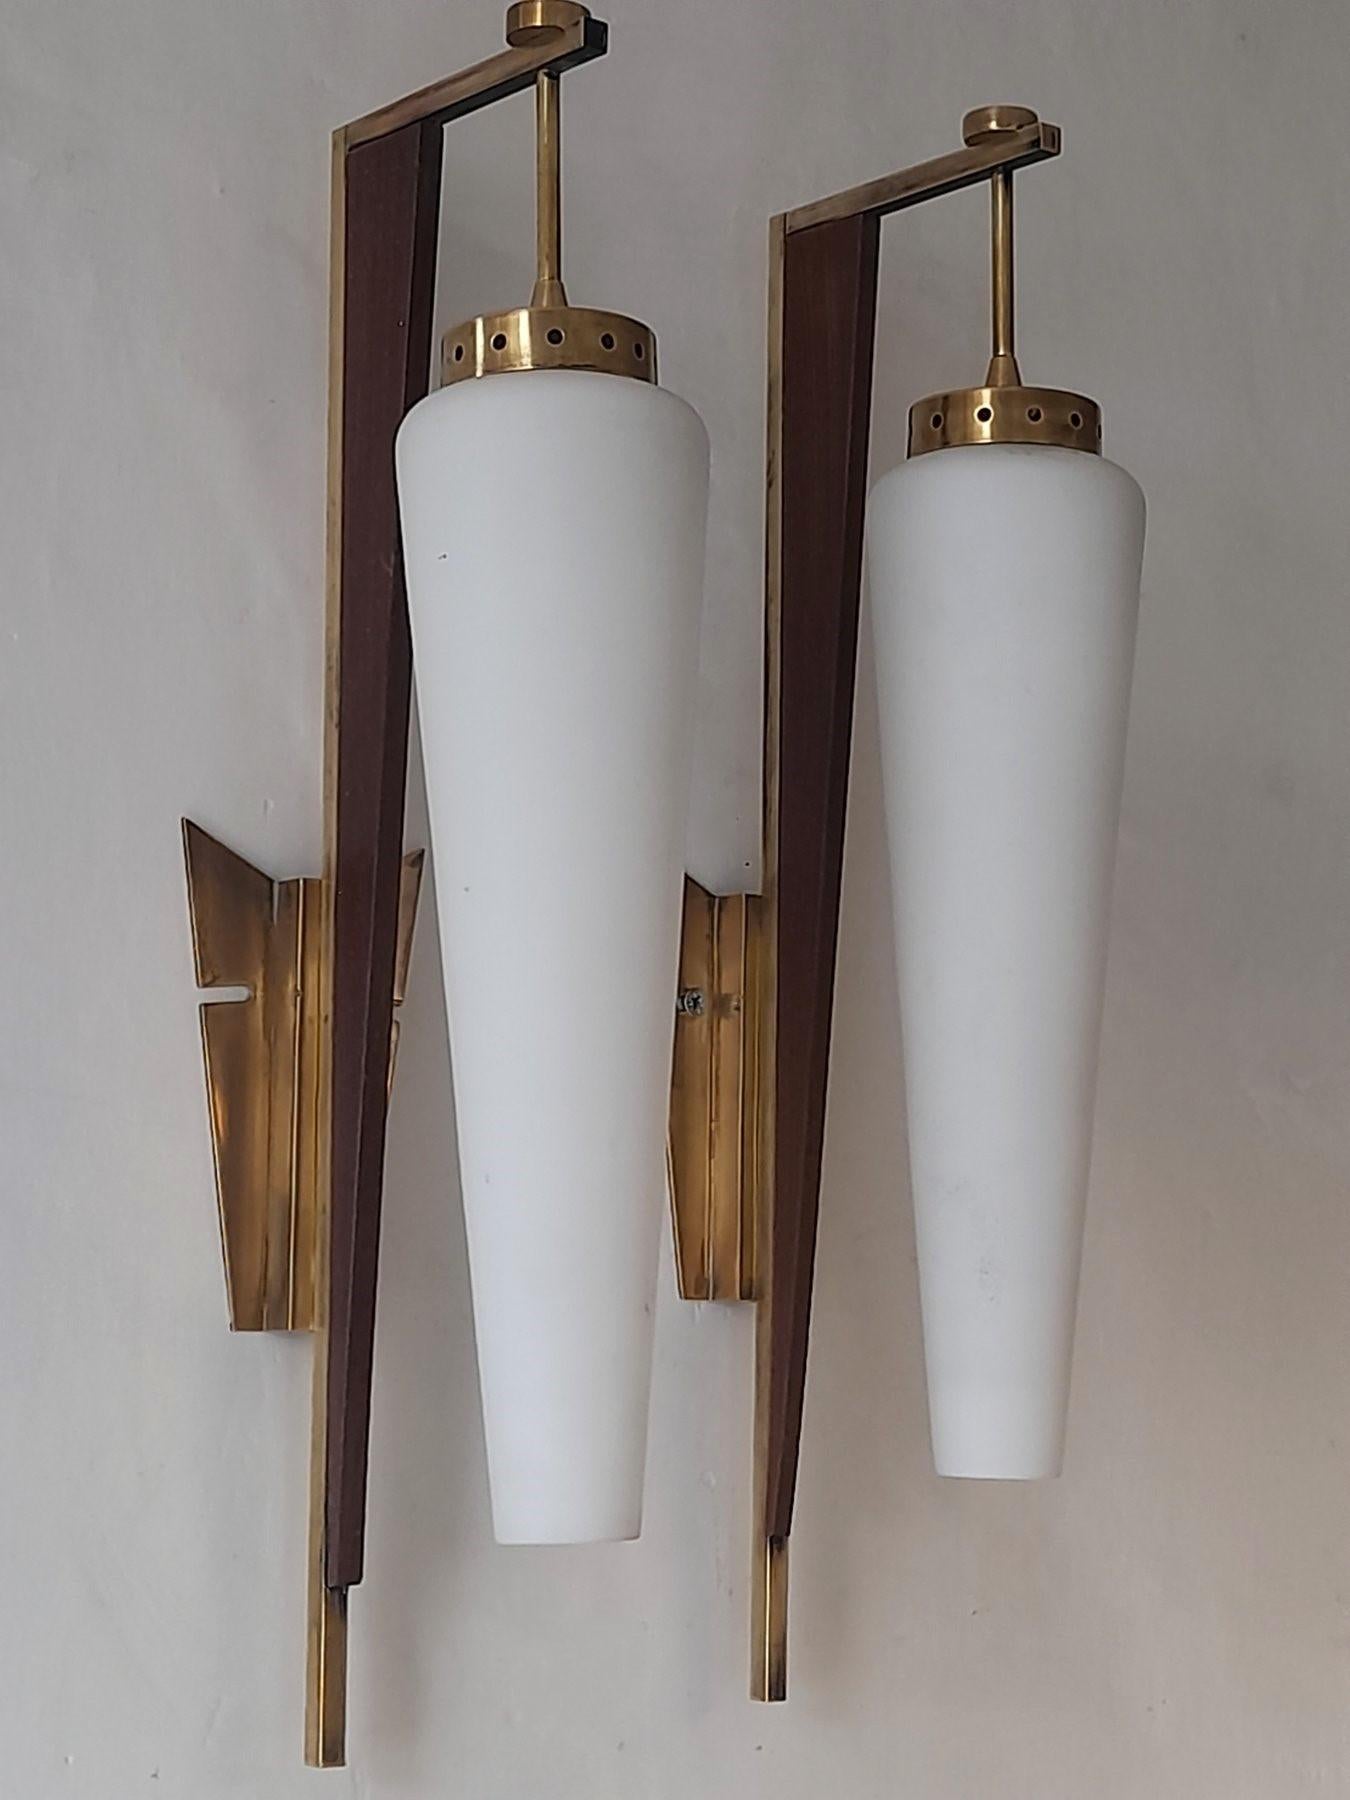 Italian Three Stilnovo Sconces Wall Lights Brass Satin Glass Wood Accents, Italy, 1950s For Sale